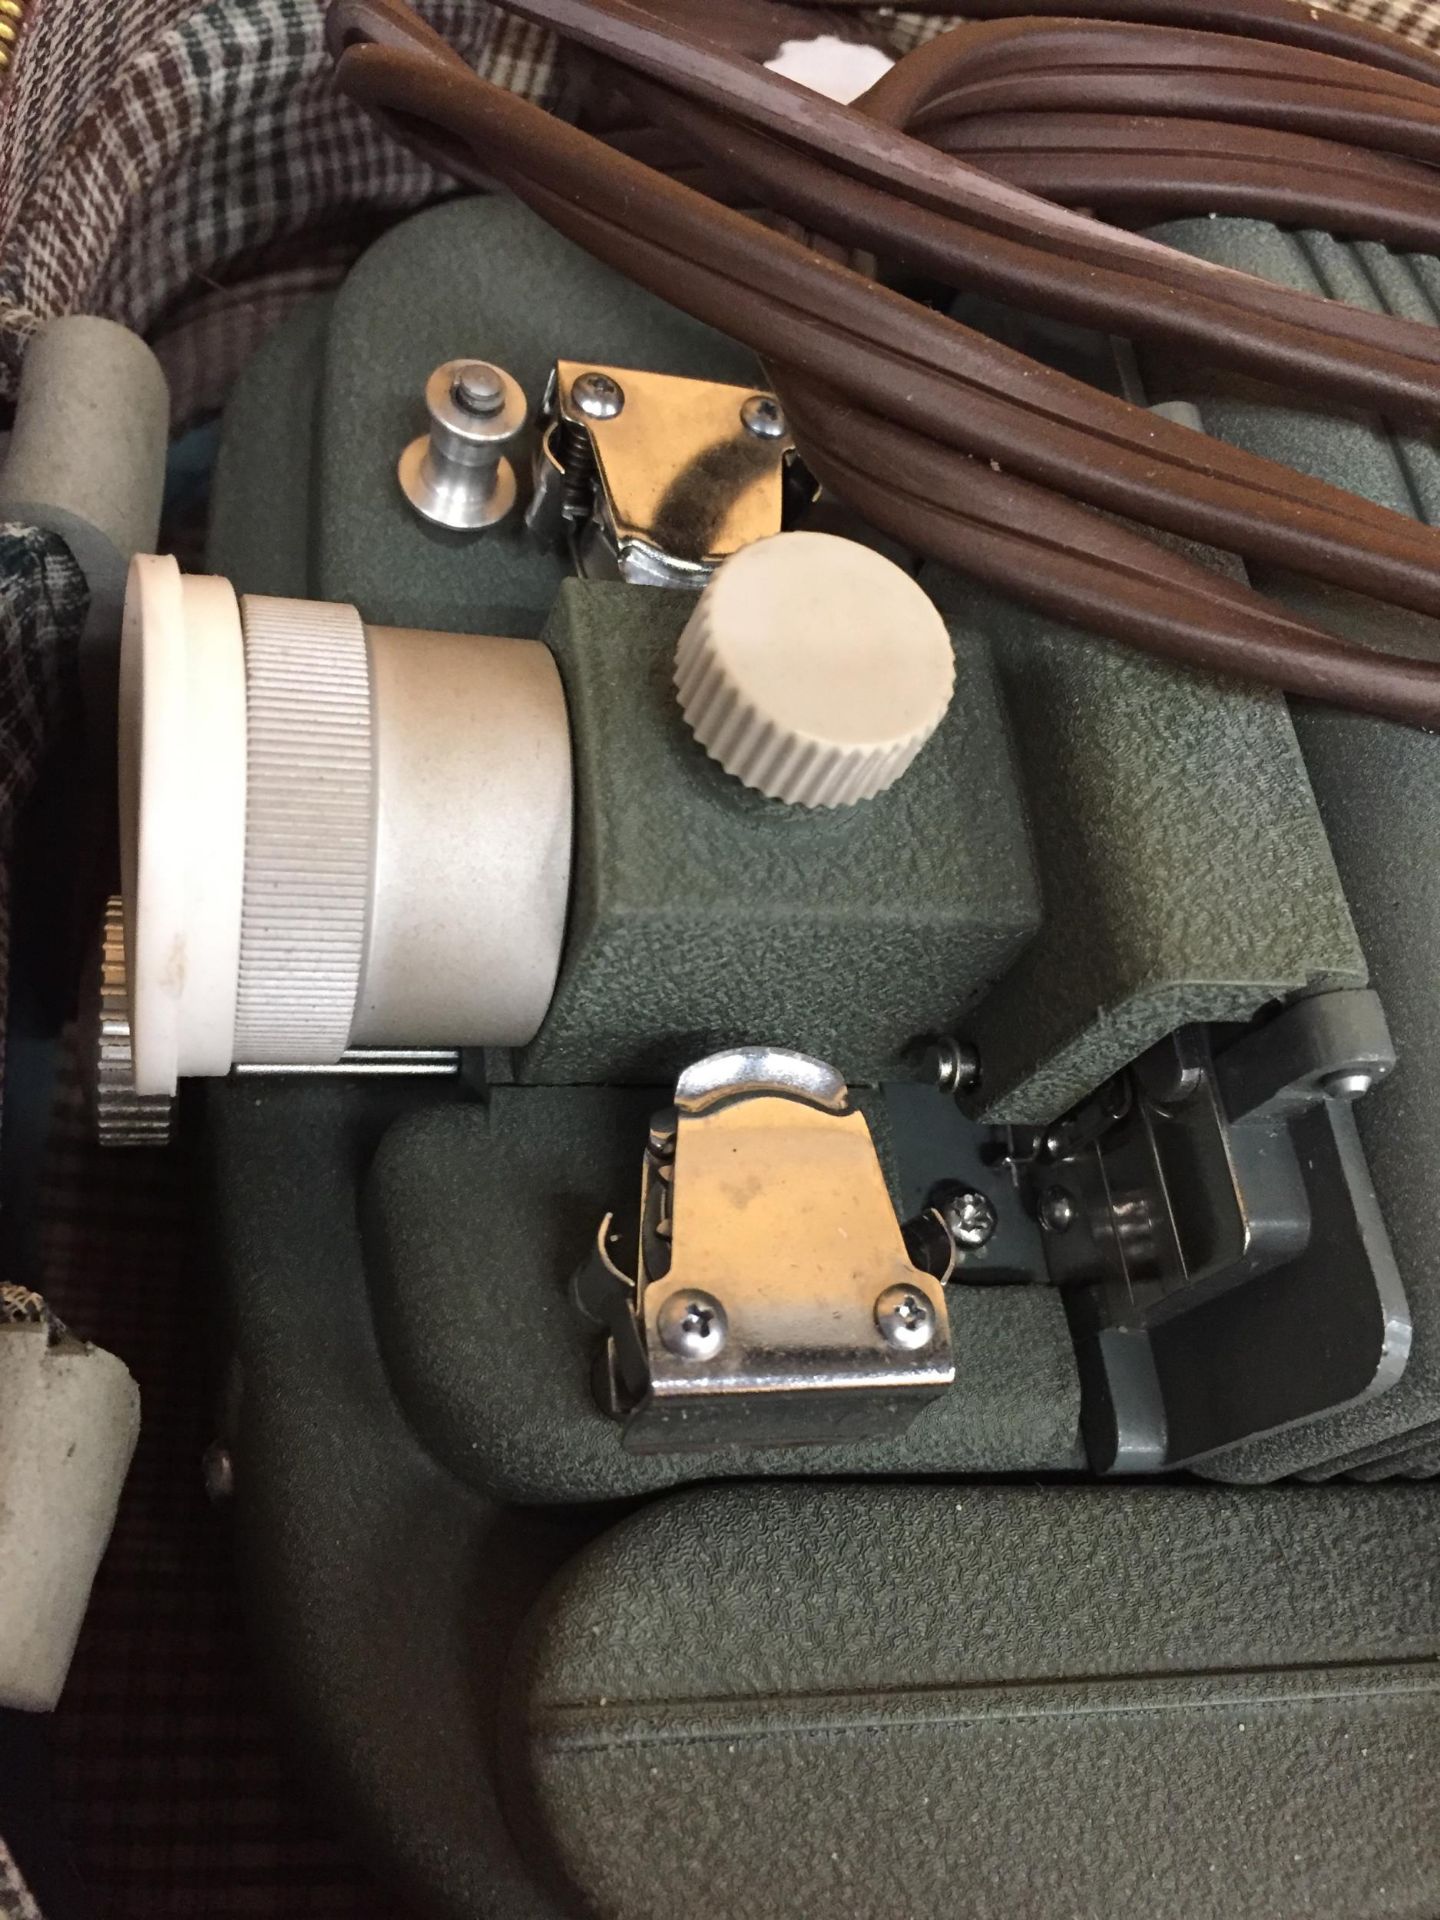 A VINTAGE SEKONIC 80P CINE CAMERA IN ORIGINAL CASE AND BOX - Image 4 of 4